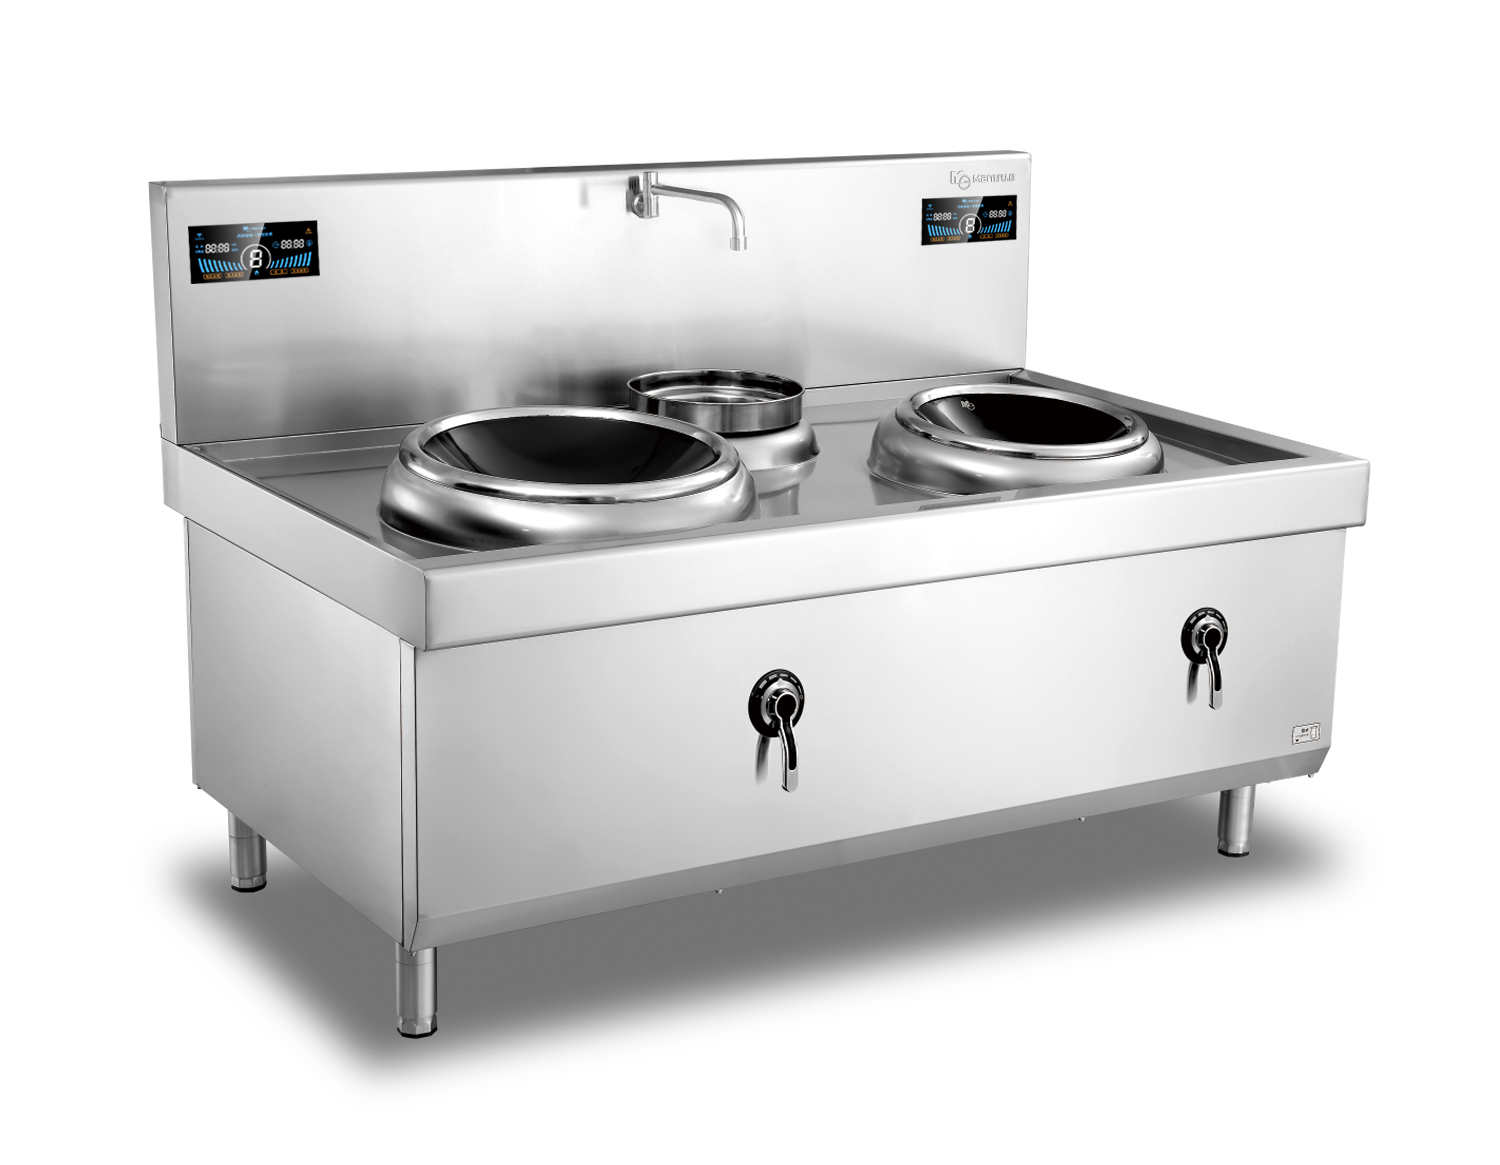 400mm+500mm Double Burner with one basin Induction Wok